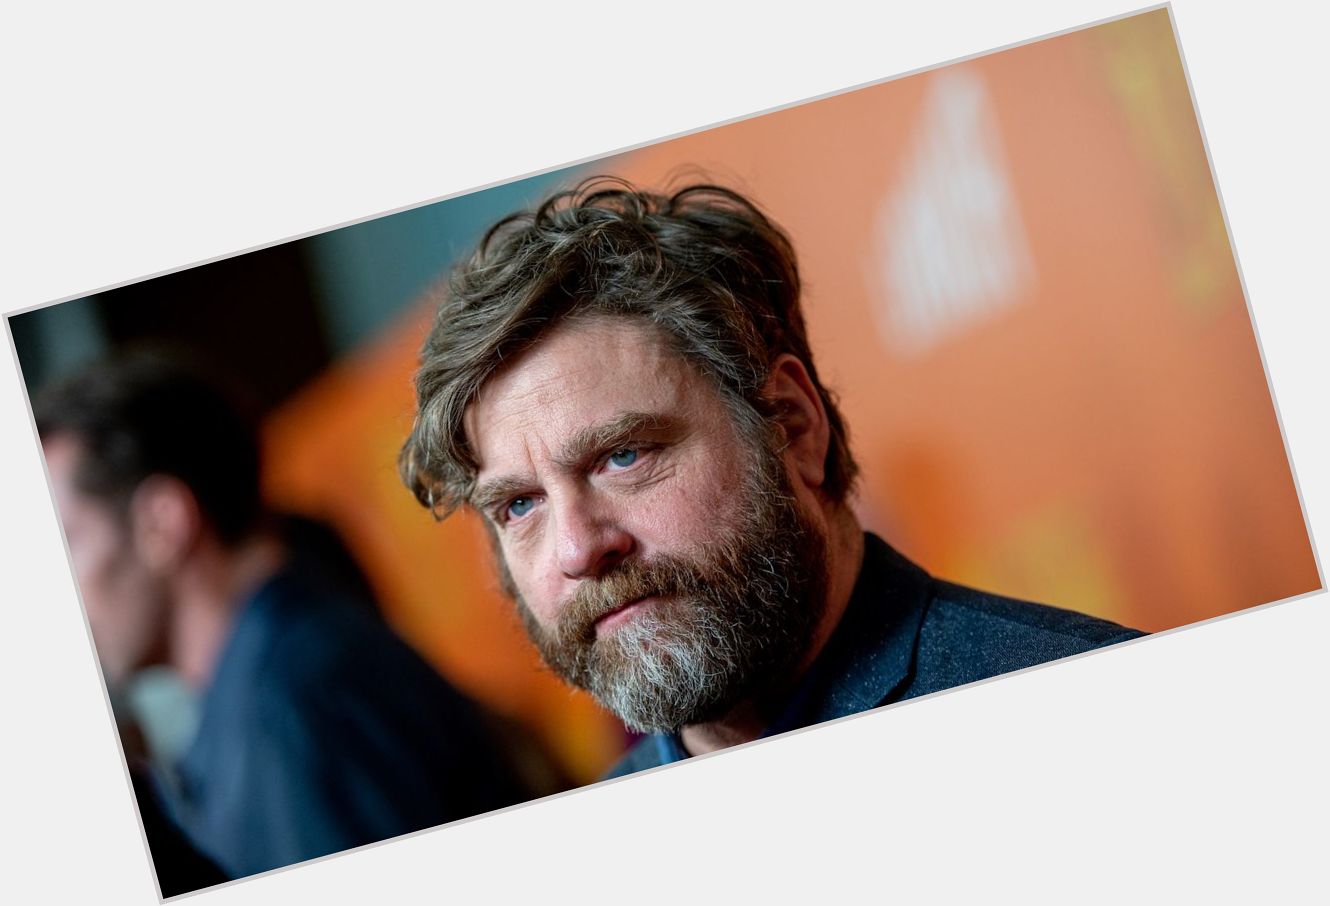 Zach Galifianakis turns 52 today!

Happy birthday to this hilarious actor 